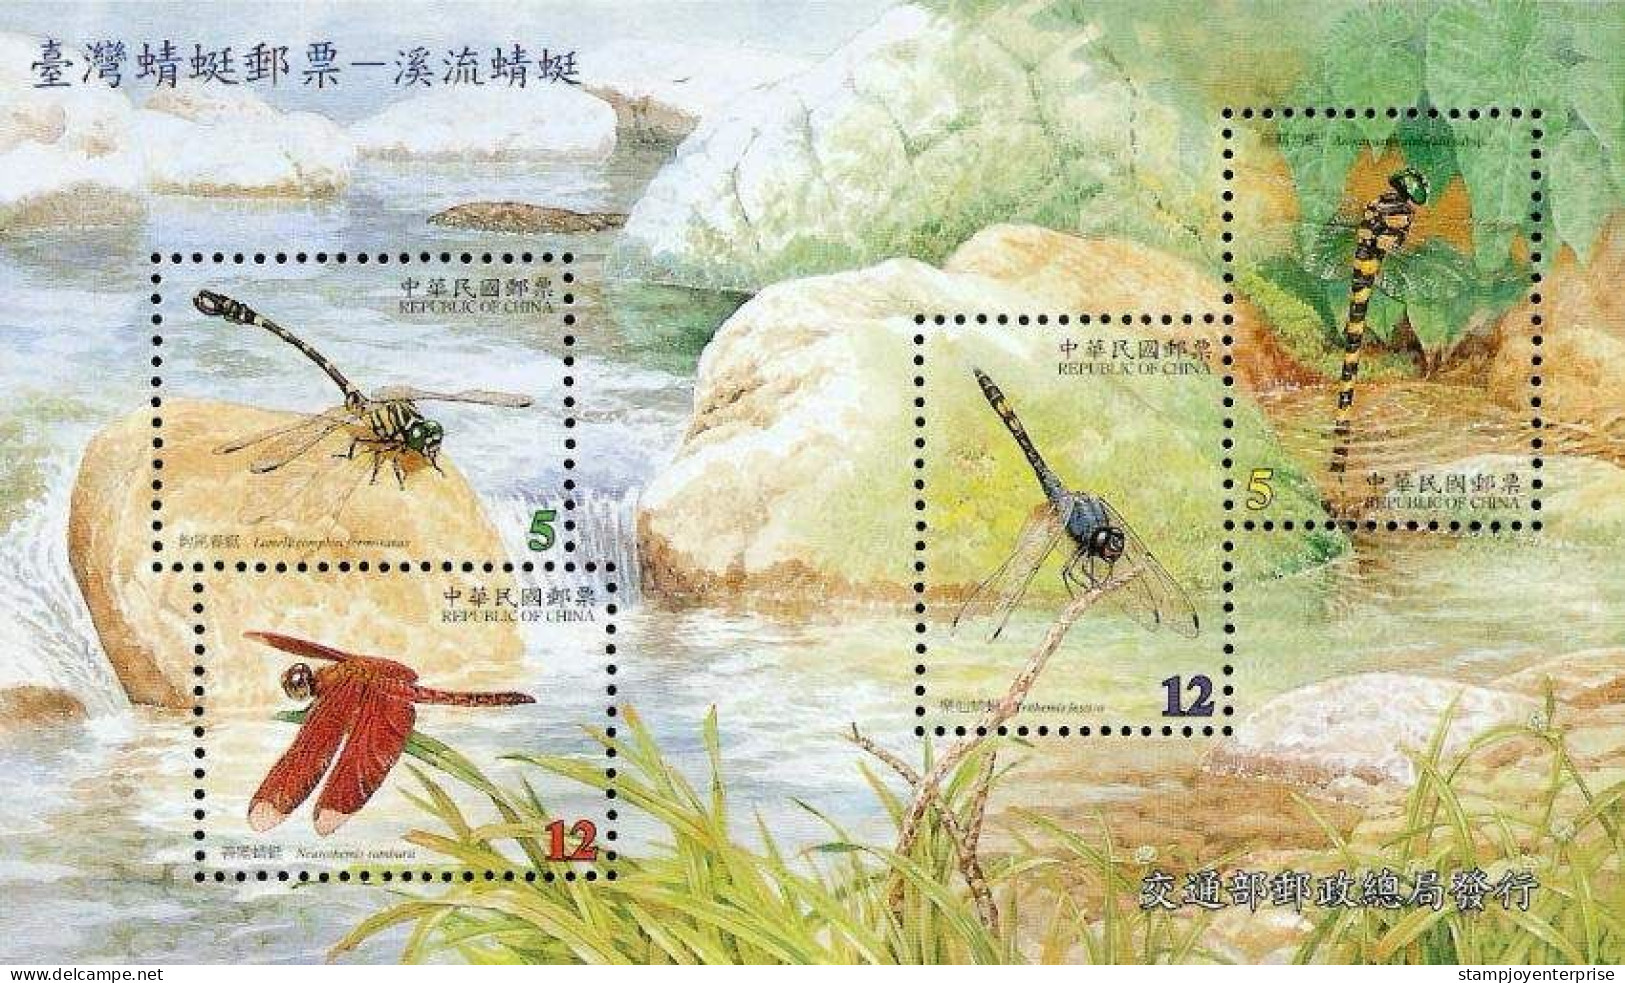 Taiwan Stream Dragonflies 2000 Insects River Wildlife Nature Dragonfly Insect (miniature Sheet) MNH - Unused Stamps